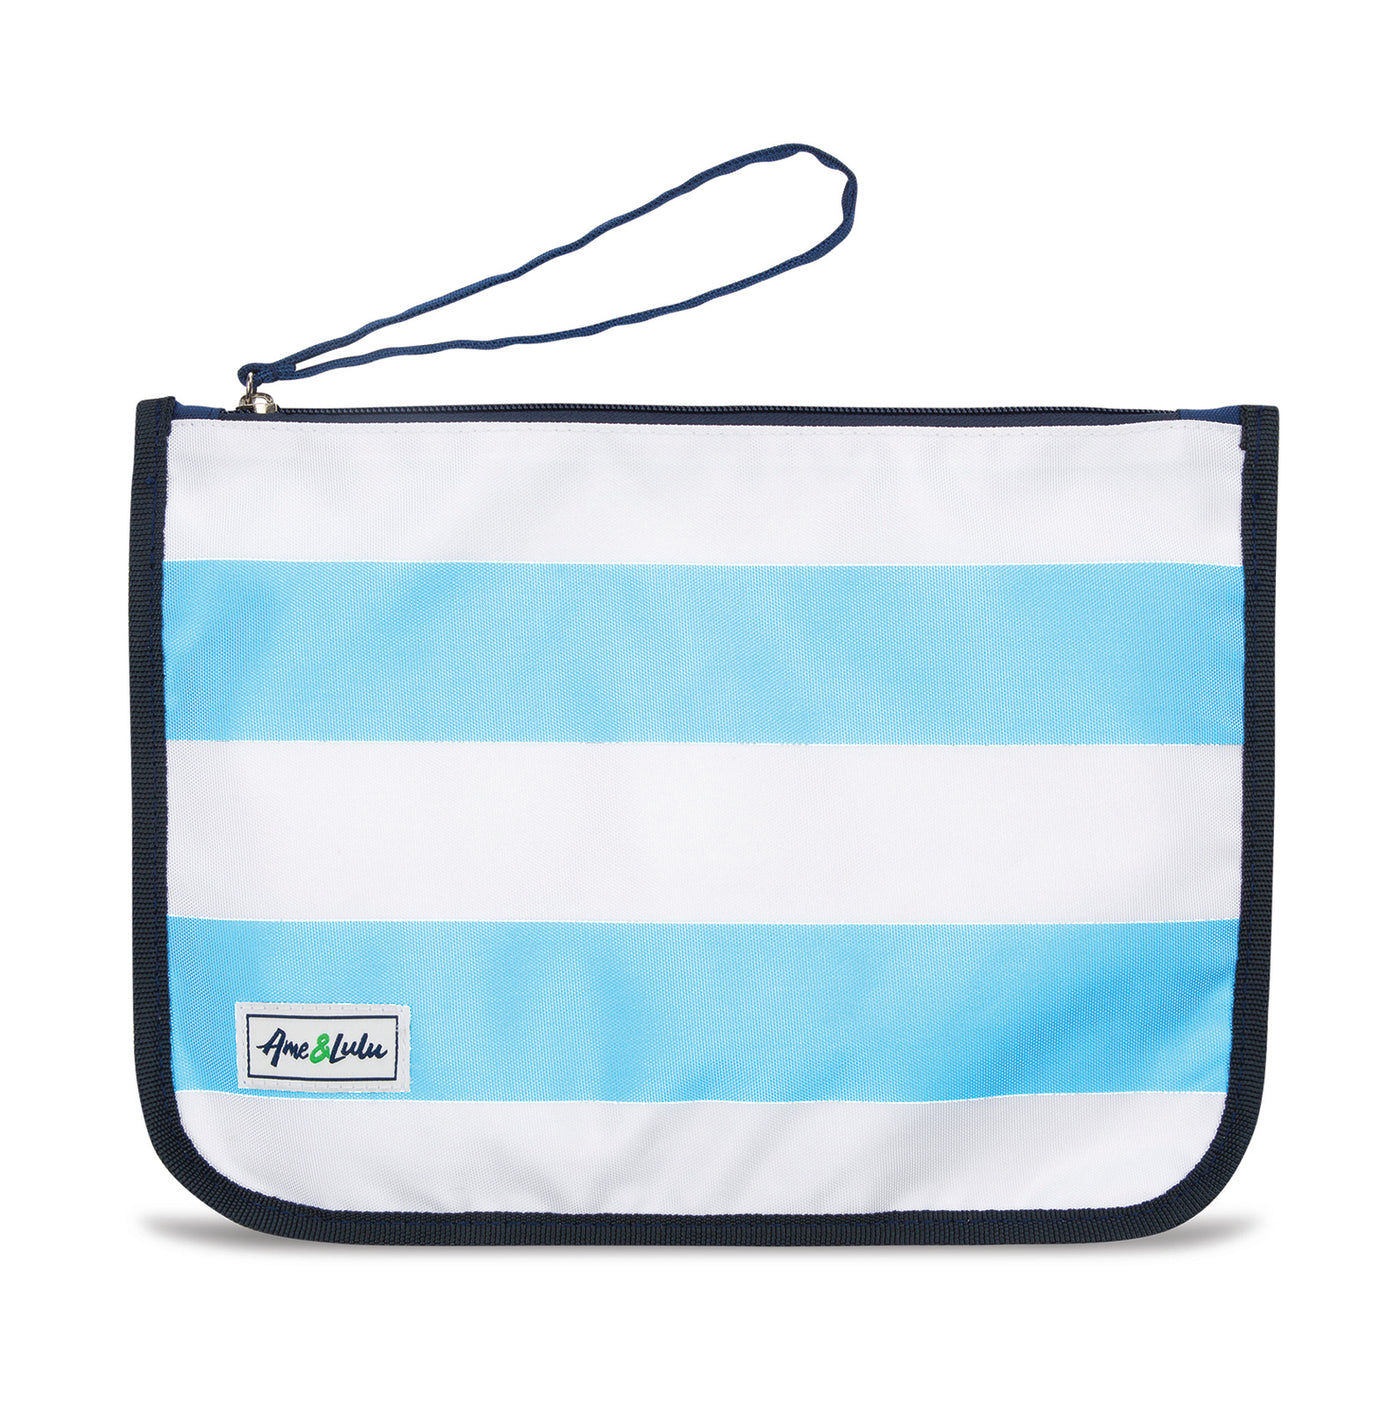 light blue and white striped nylon zip pouch with wrist strap